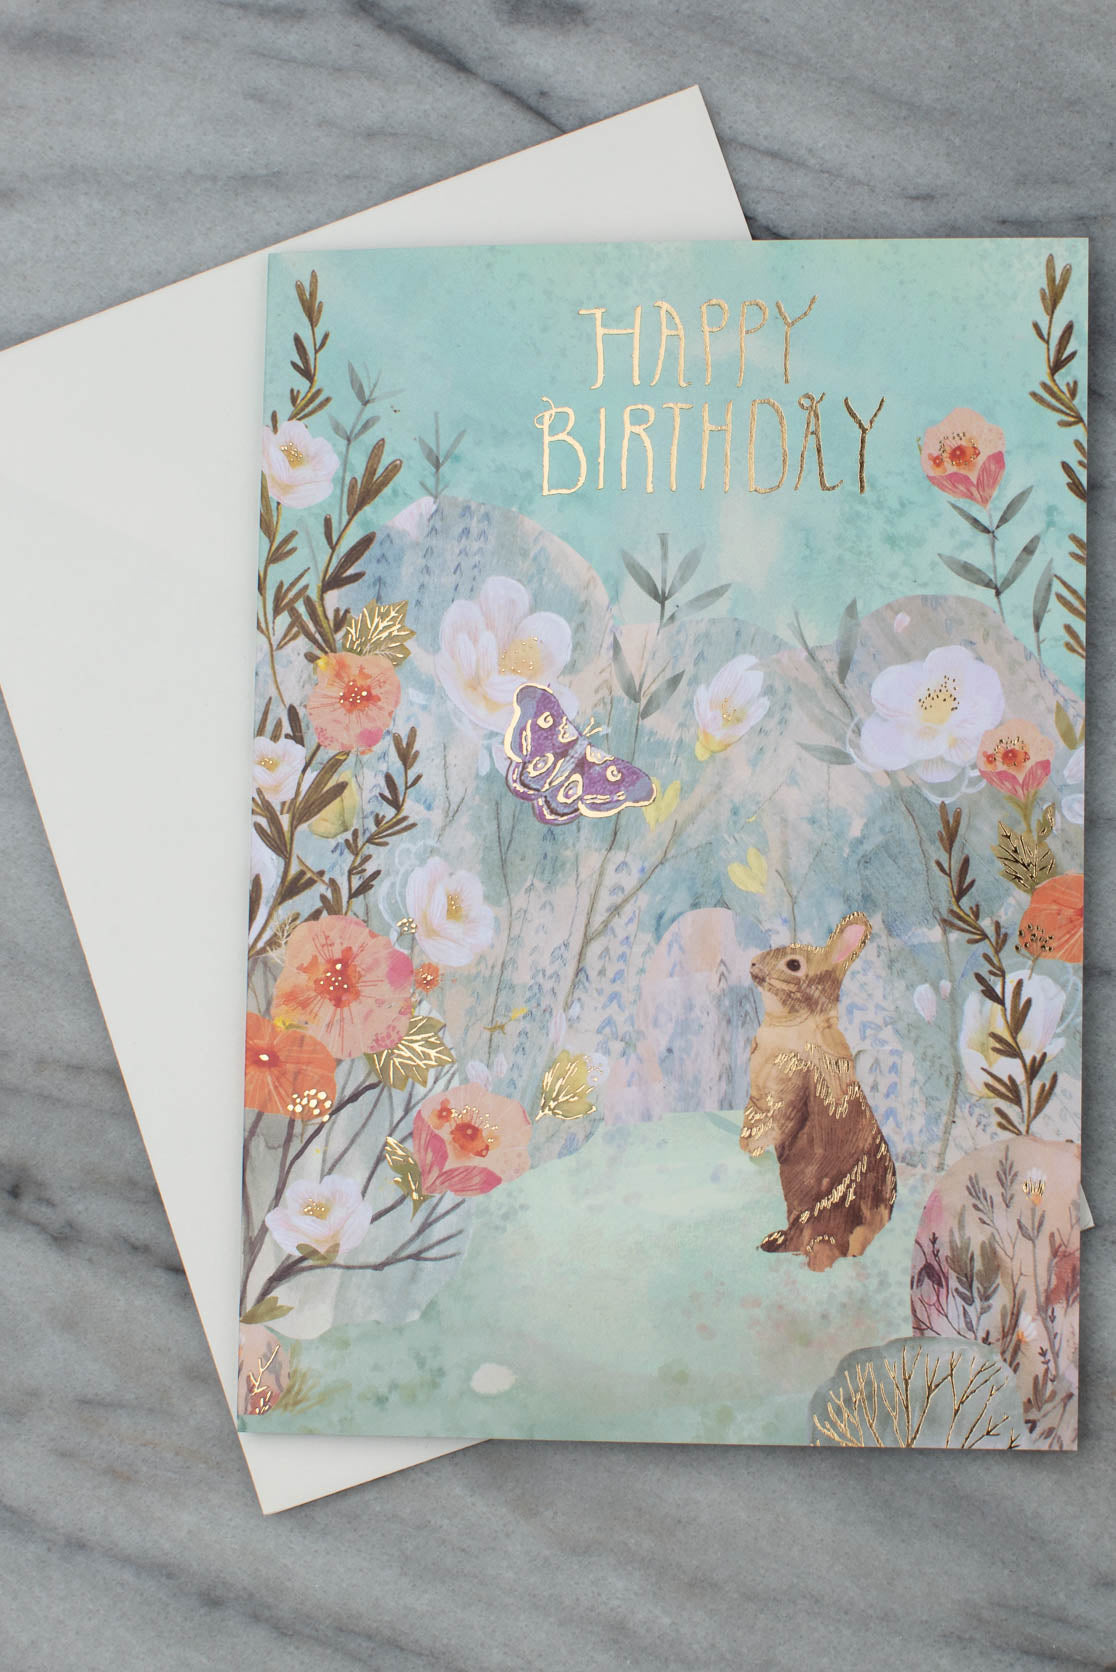 Bunny and flowers birthday card with white envelope